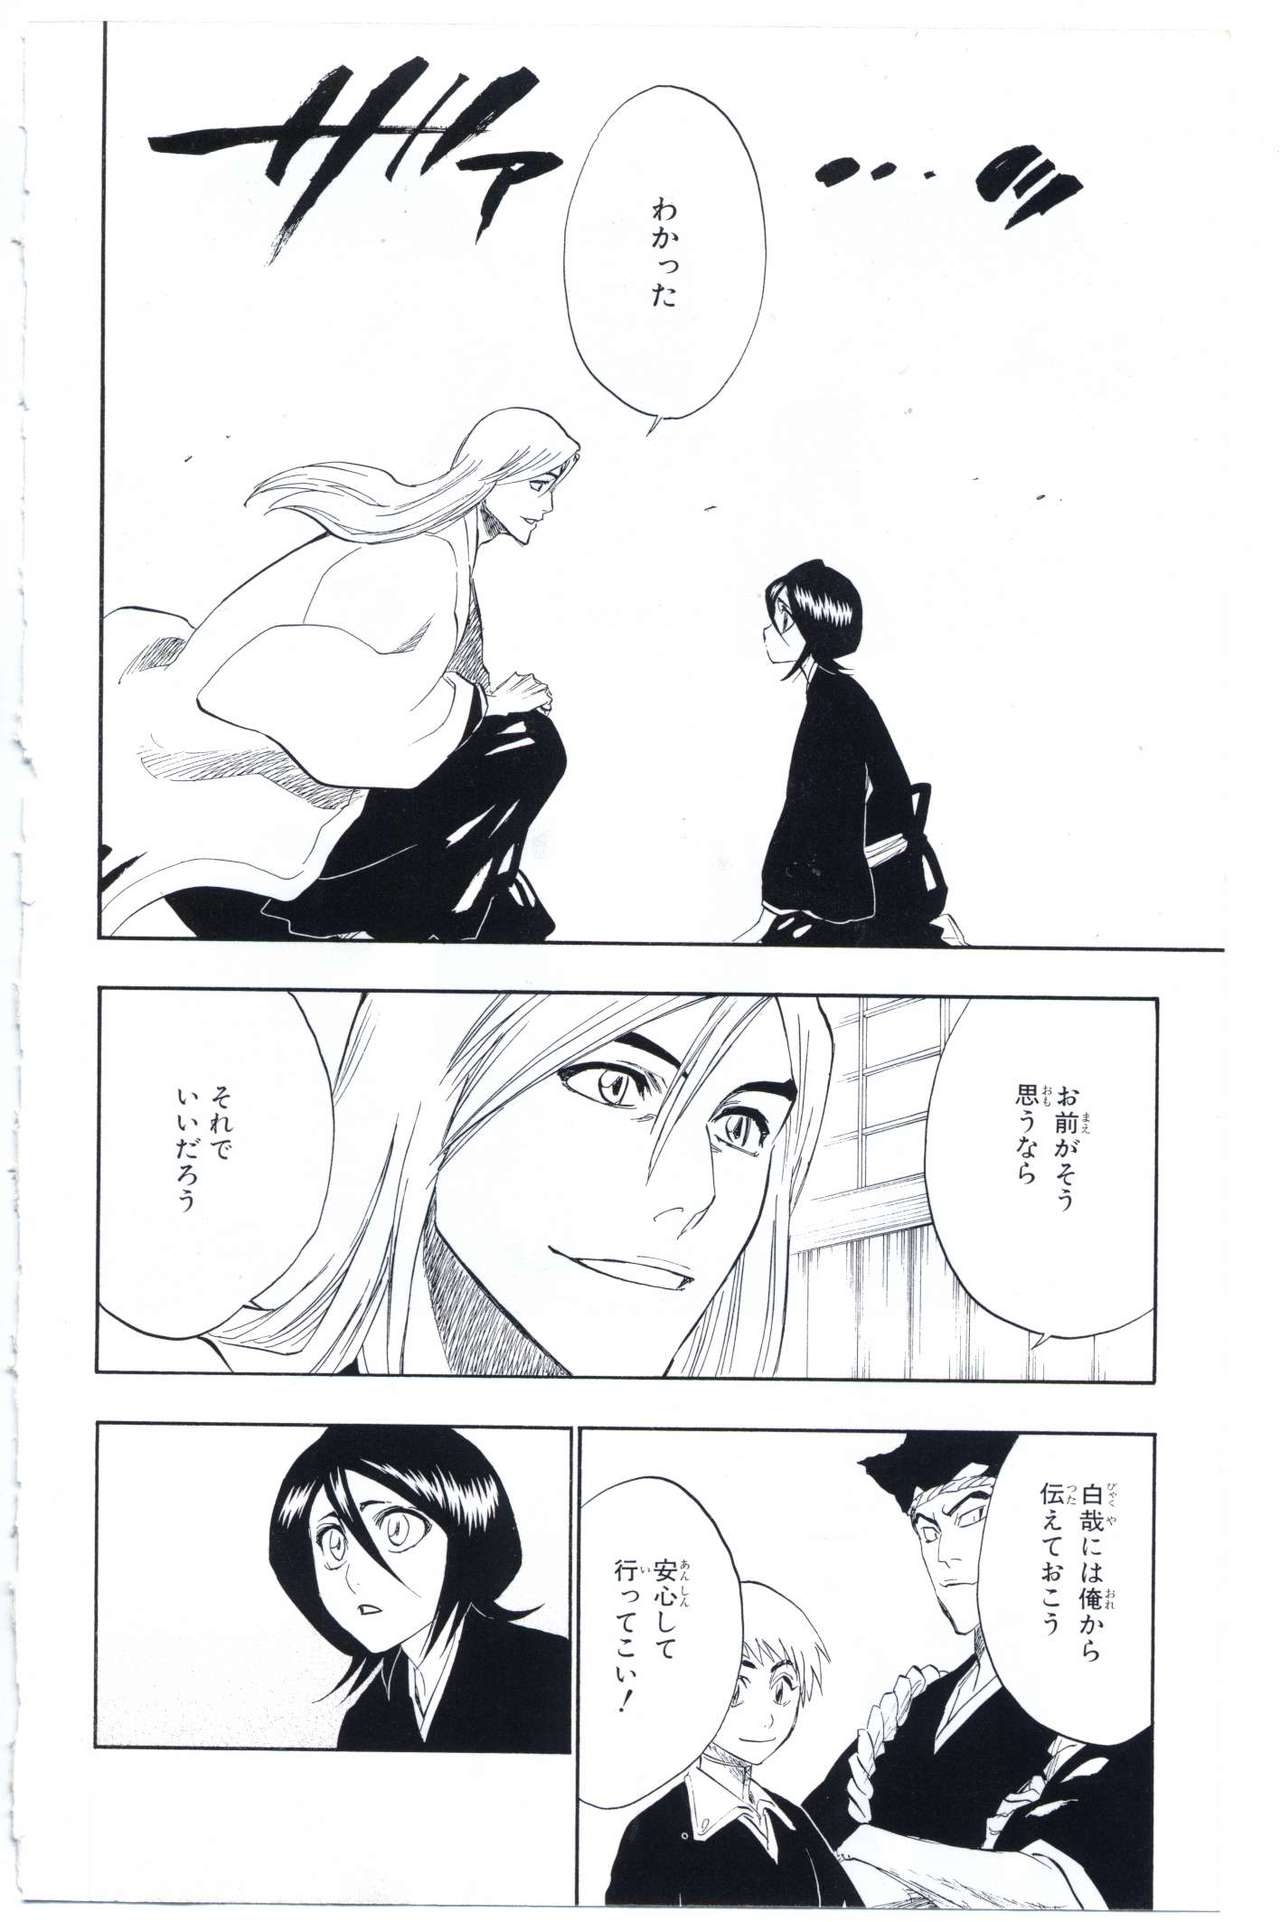 Bleach: Official Animation Book VIBEs 208